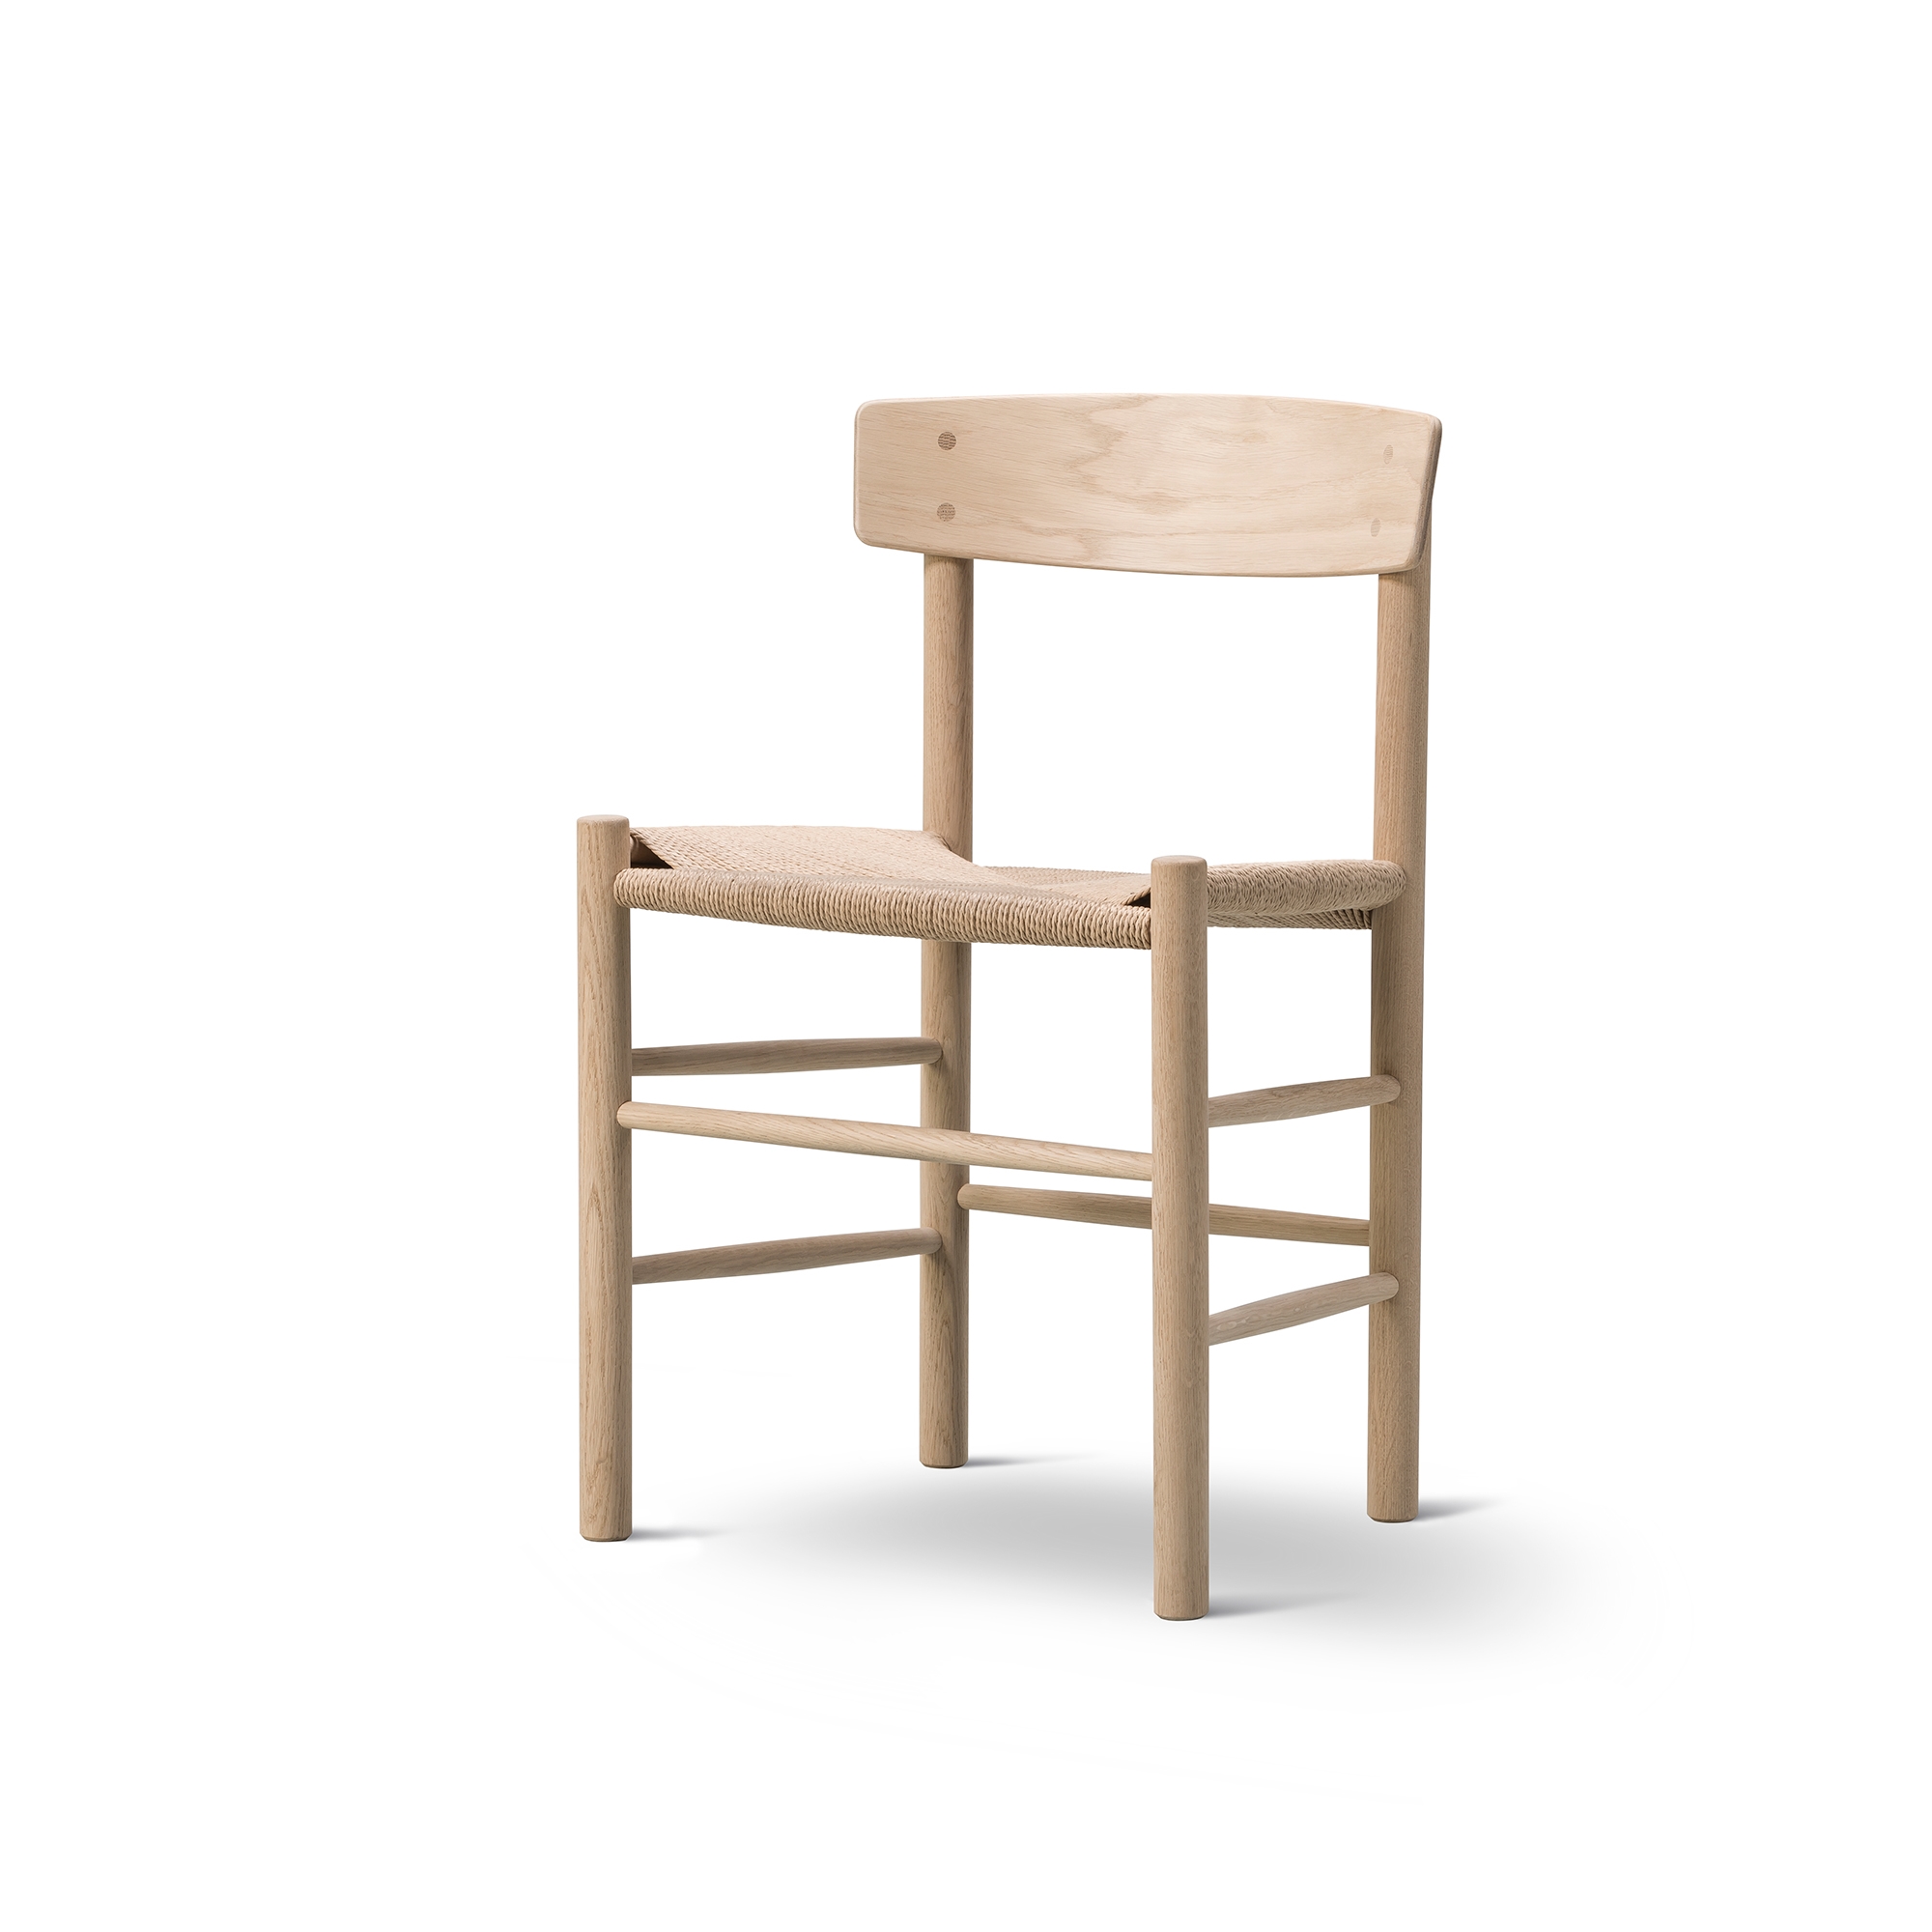 Fredericia Furniture Mogensen J39 Dining Table Chair Soap-treated Oak/Paper Yarn